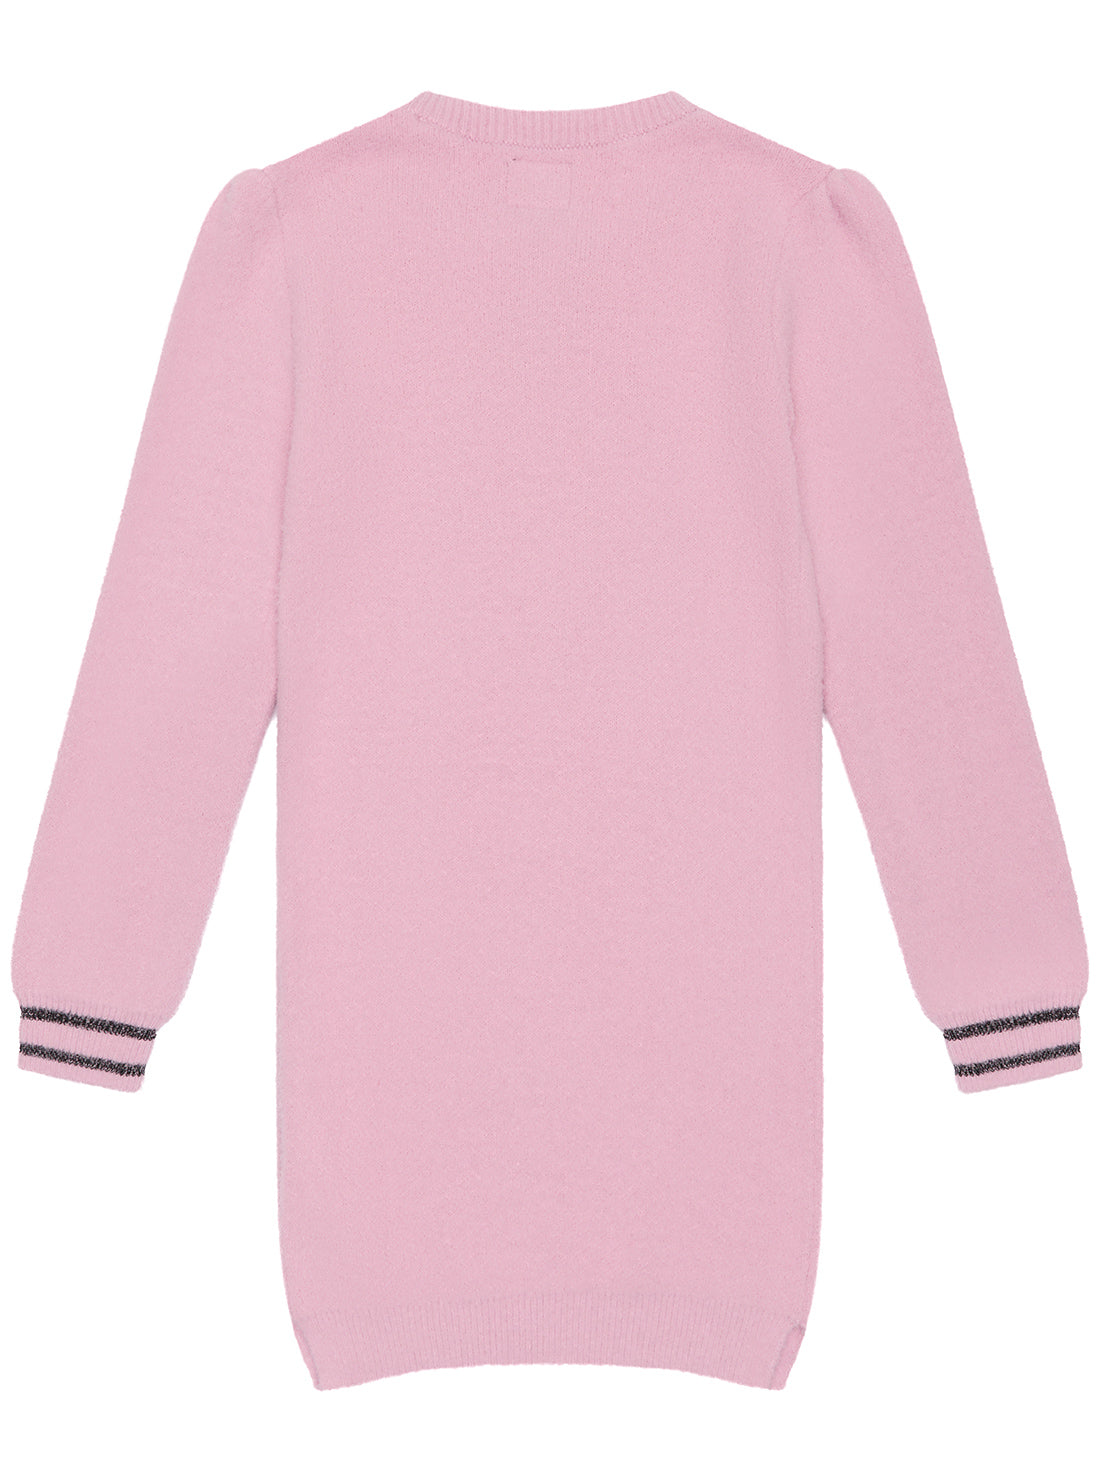 GUESS Pink Long Sleeve Knit Dress (2-7) back view